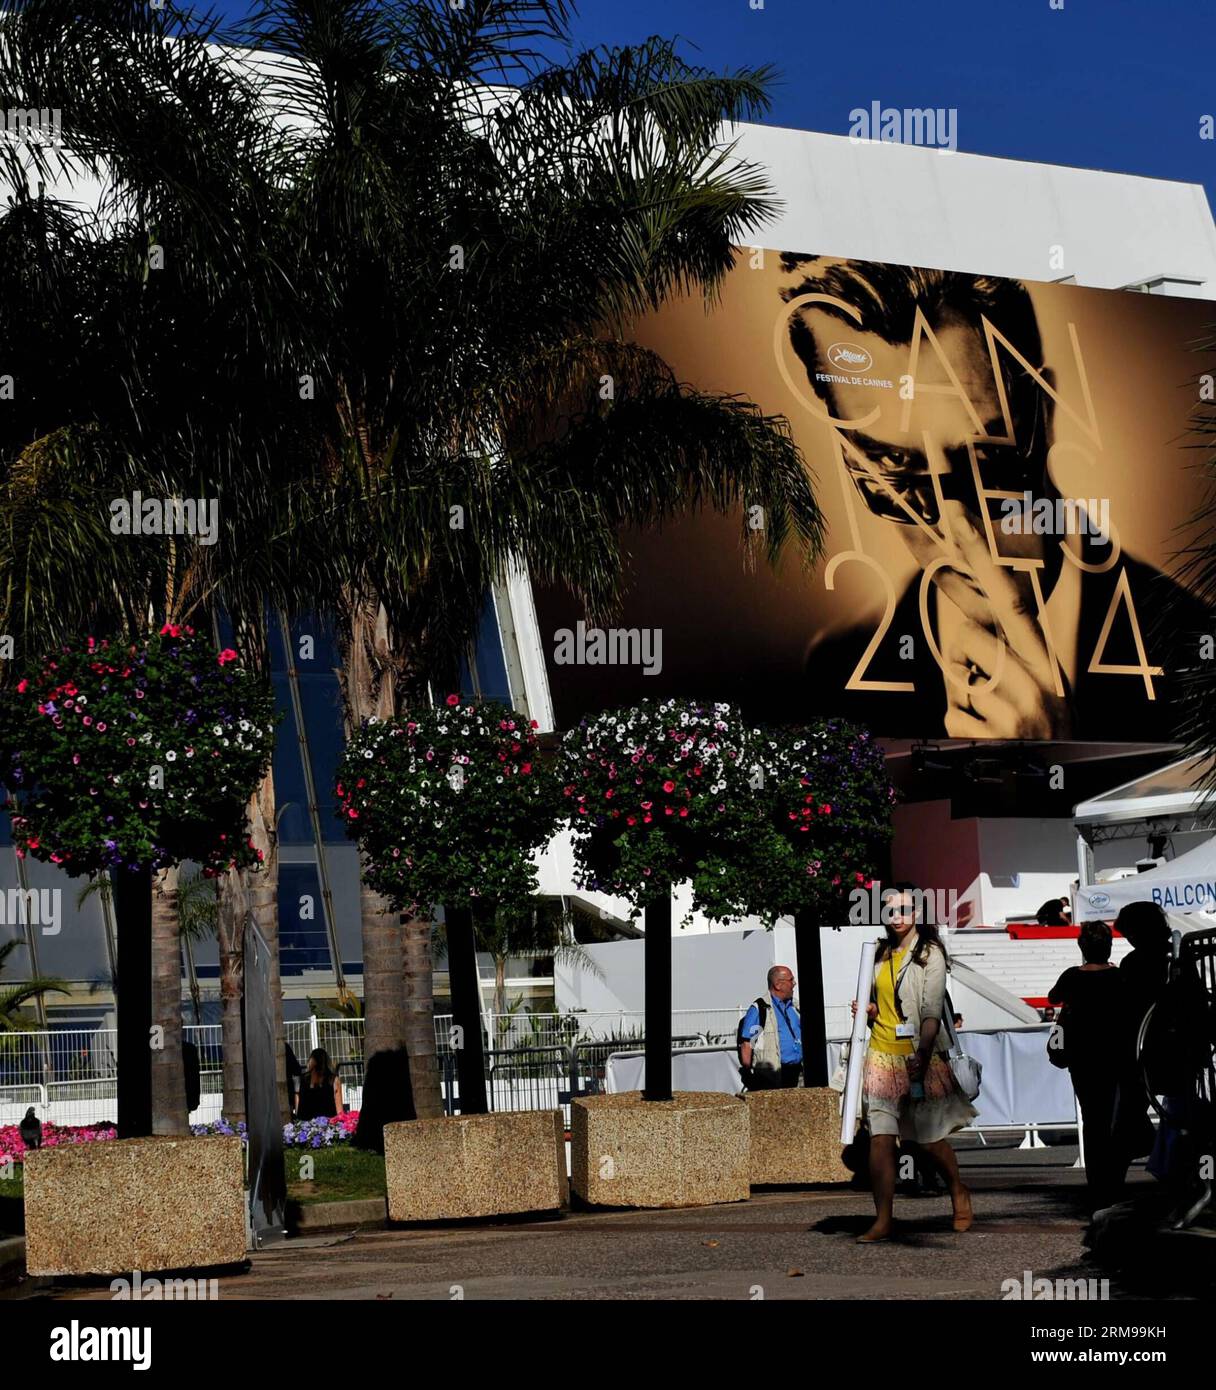 (140514) -- CANNES, May 14, 2014 (Xinhua) -- People walk past a giant poster of the 67th Cannes Film Festival in Cannes, France, May 14, 2014. The 67th Cannes Film Festival will run from May 14 to 24 with 18 films competing for the top prize the Palme d Or. (Xinhua/Chen Xiaowei) FRANCE-CANNES-ENTERTAINMENT-67TH CANNES FILM FESTIVAL PUBLICATIONxNOTxINxCHN   Cannes May 14 2014 XINHUA Celebrities Walk Past a Giant Poster of The 67th Cannes Film Festival in Cannes France May 14 2014 The 67th Cannes Film Festival will Run from May 14 to 24 With 18 Films competing for The Top Prize The Palme D or XI Stock Photo